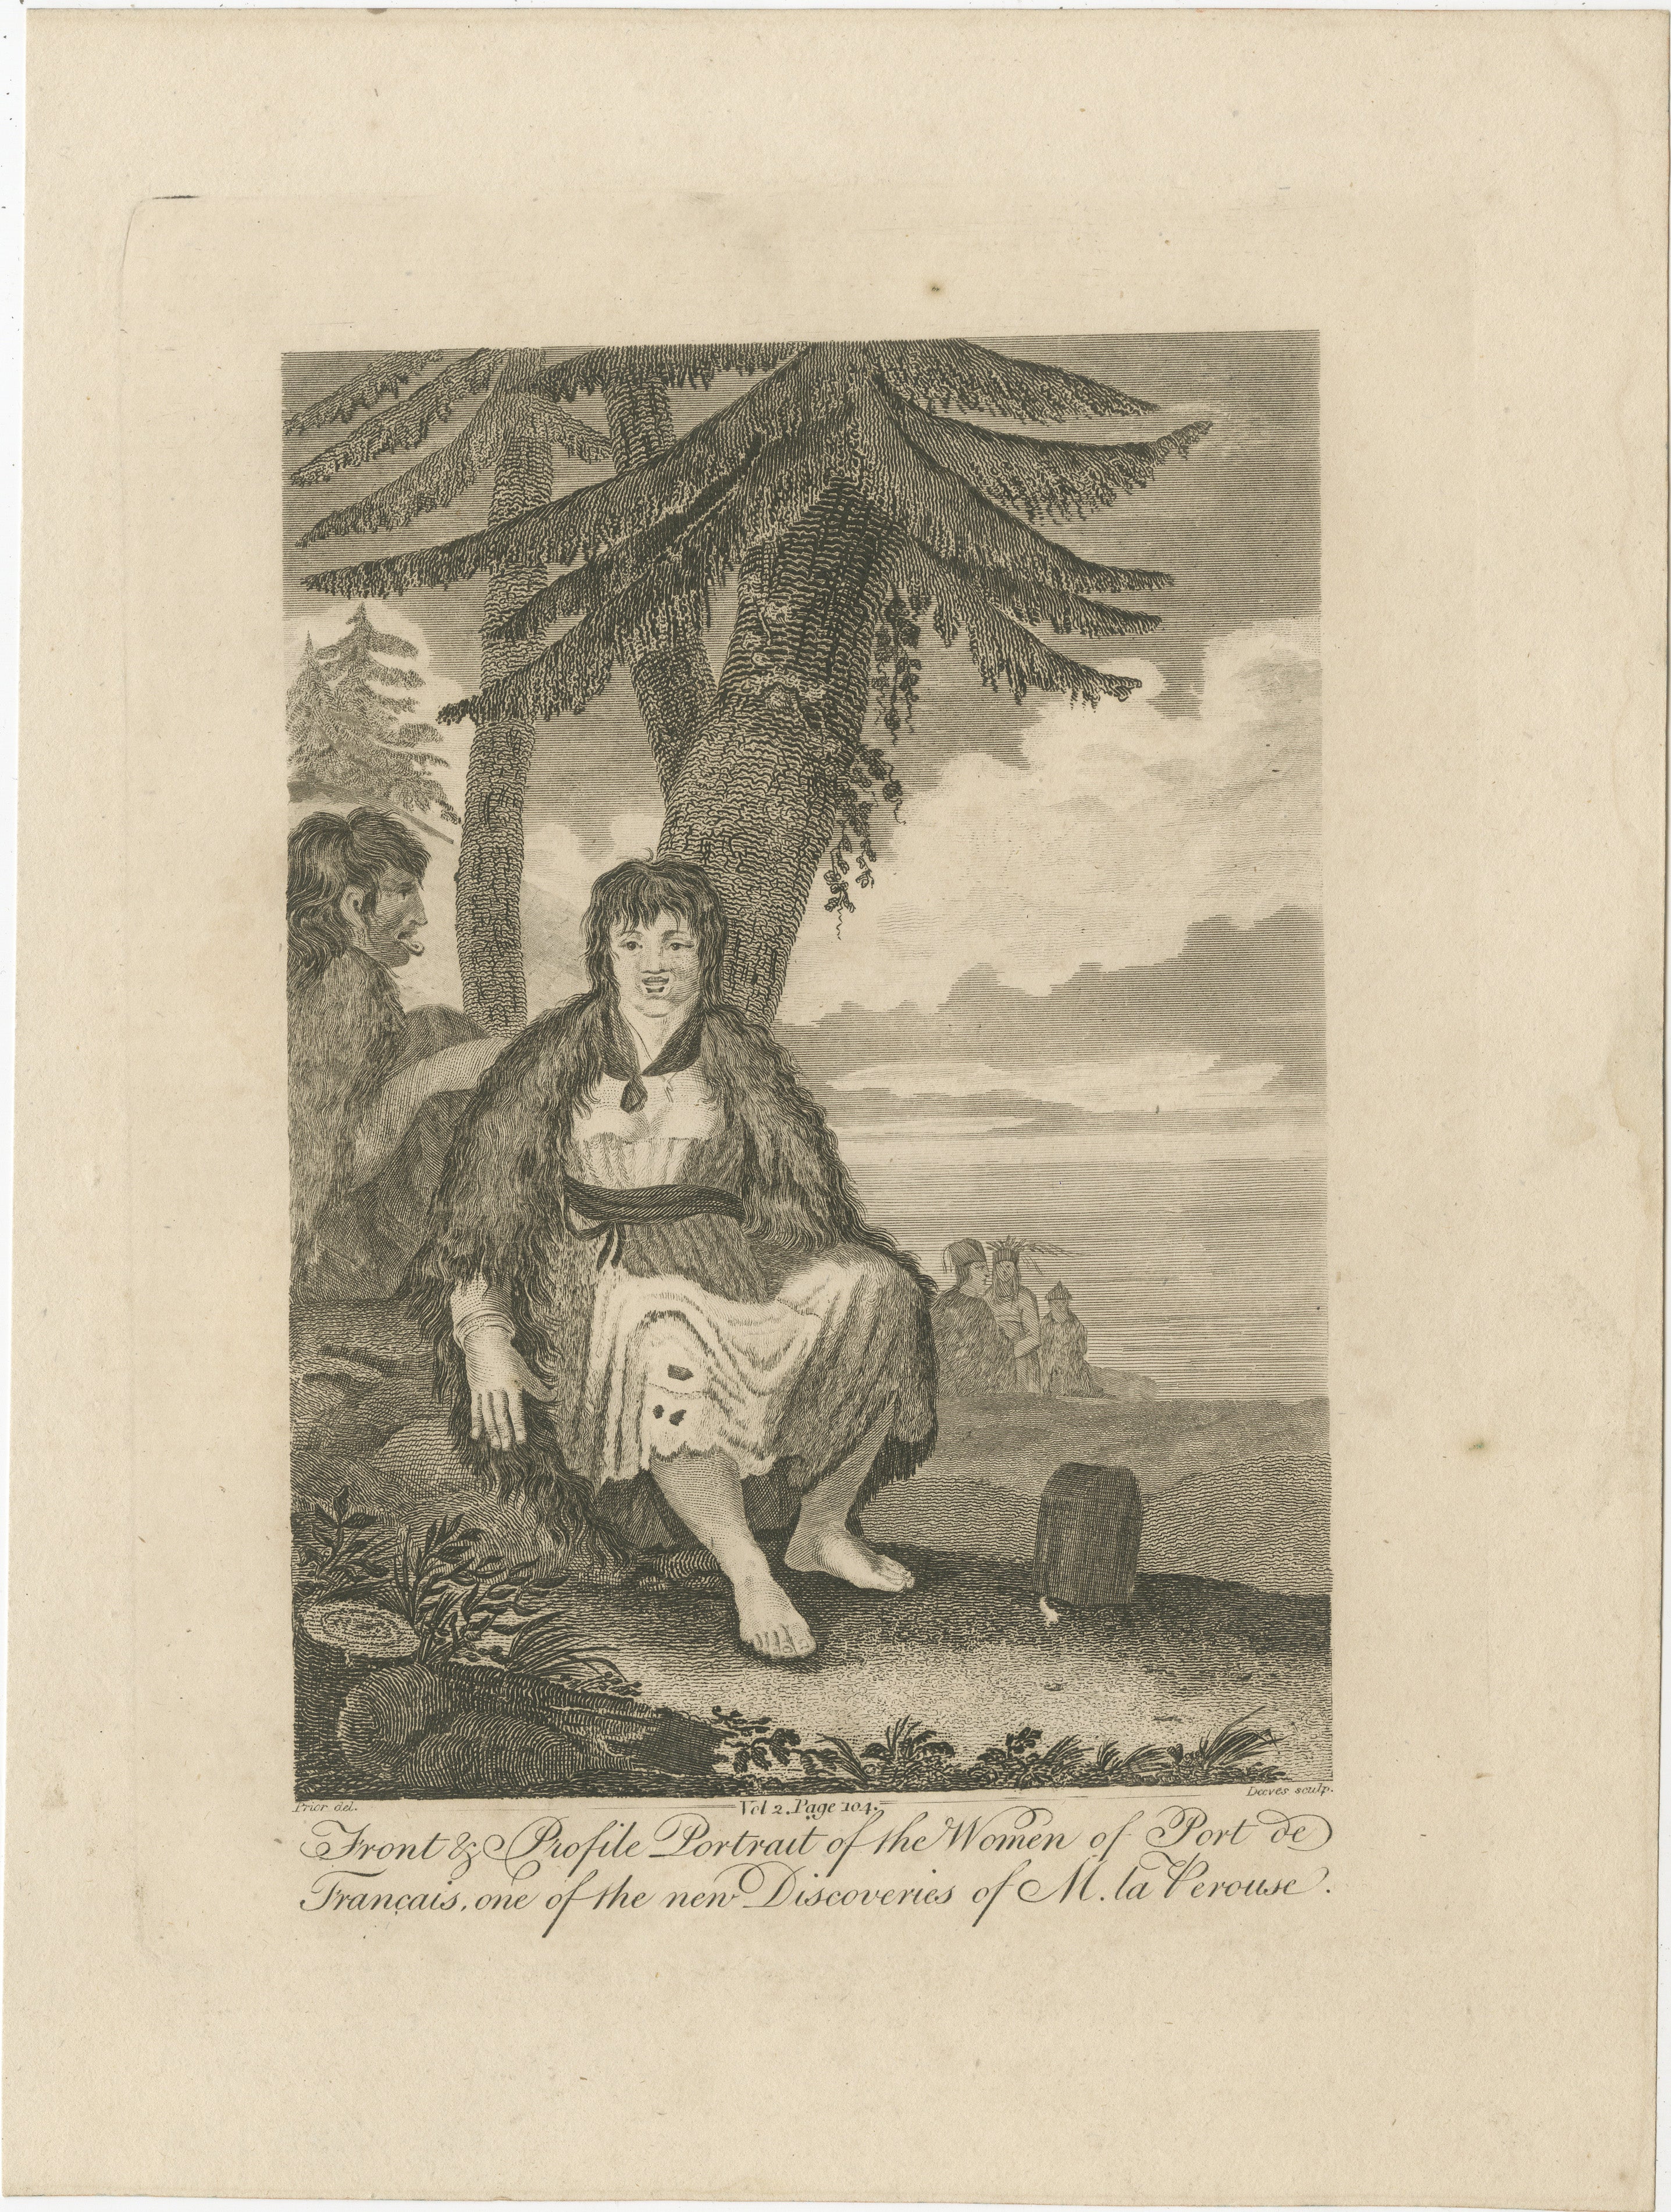 This image is an original historical print showcasing two representations of a woman from Port Francais, a locale associated with the explorations of Jean-François de Galaup, comte de La Pérouse. 

The left side of the print presents the profile